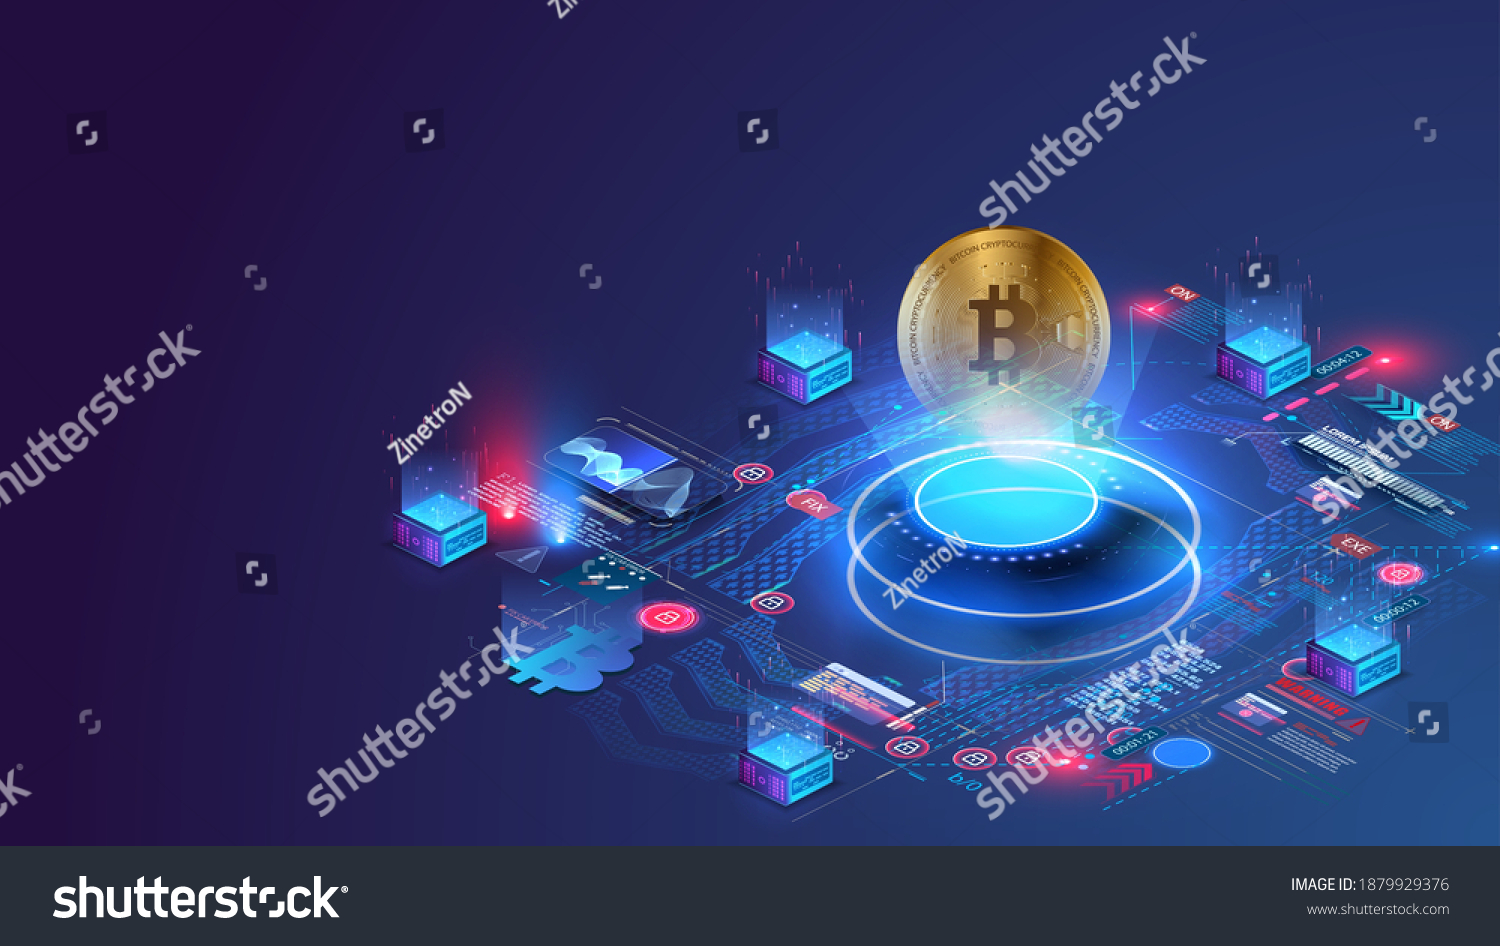 SVG of Digital currency or cryptocurrency mining farm. Creation of bitcoins. Crypto mining, blockchain concept. Crypto currency market landing page. Hologram of a Bitcoin coin on a blue futuristic background svg